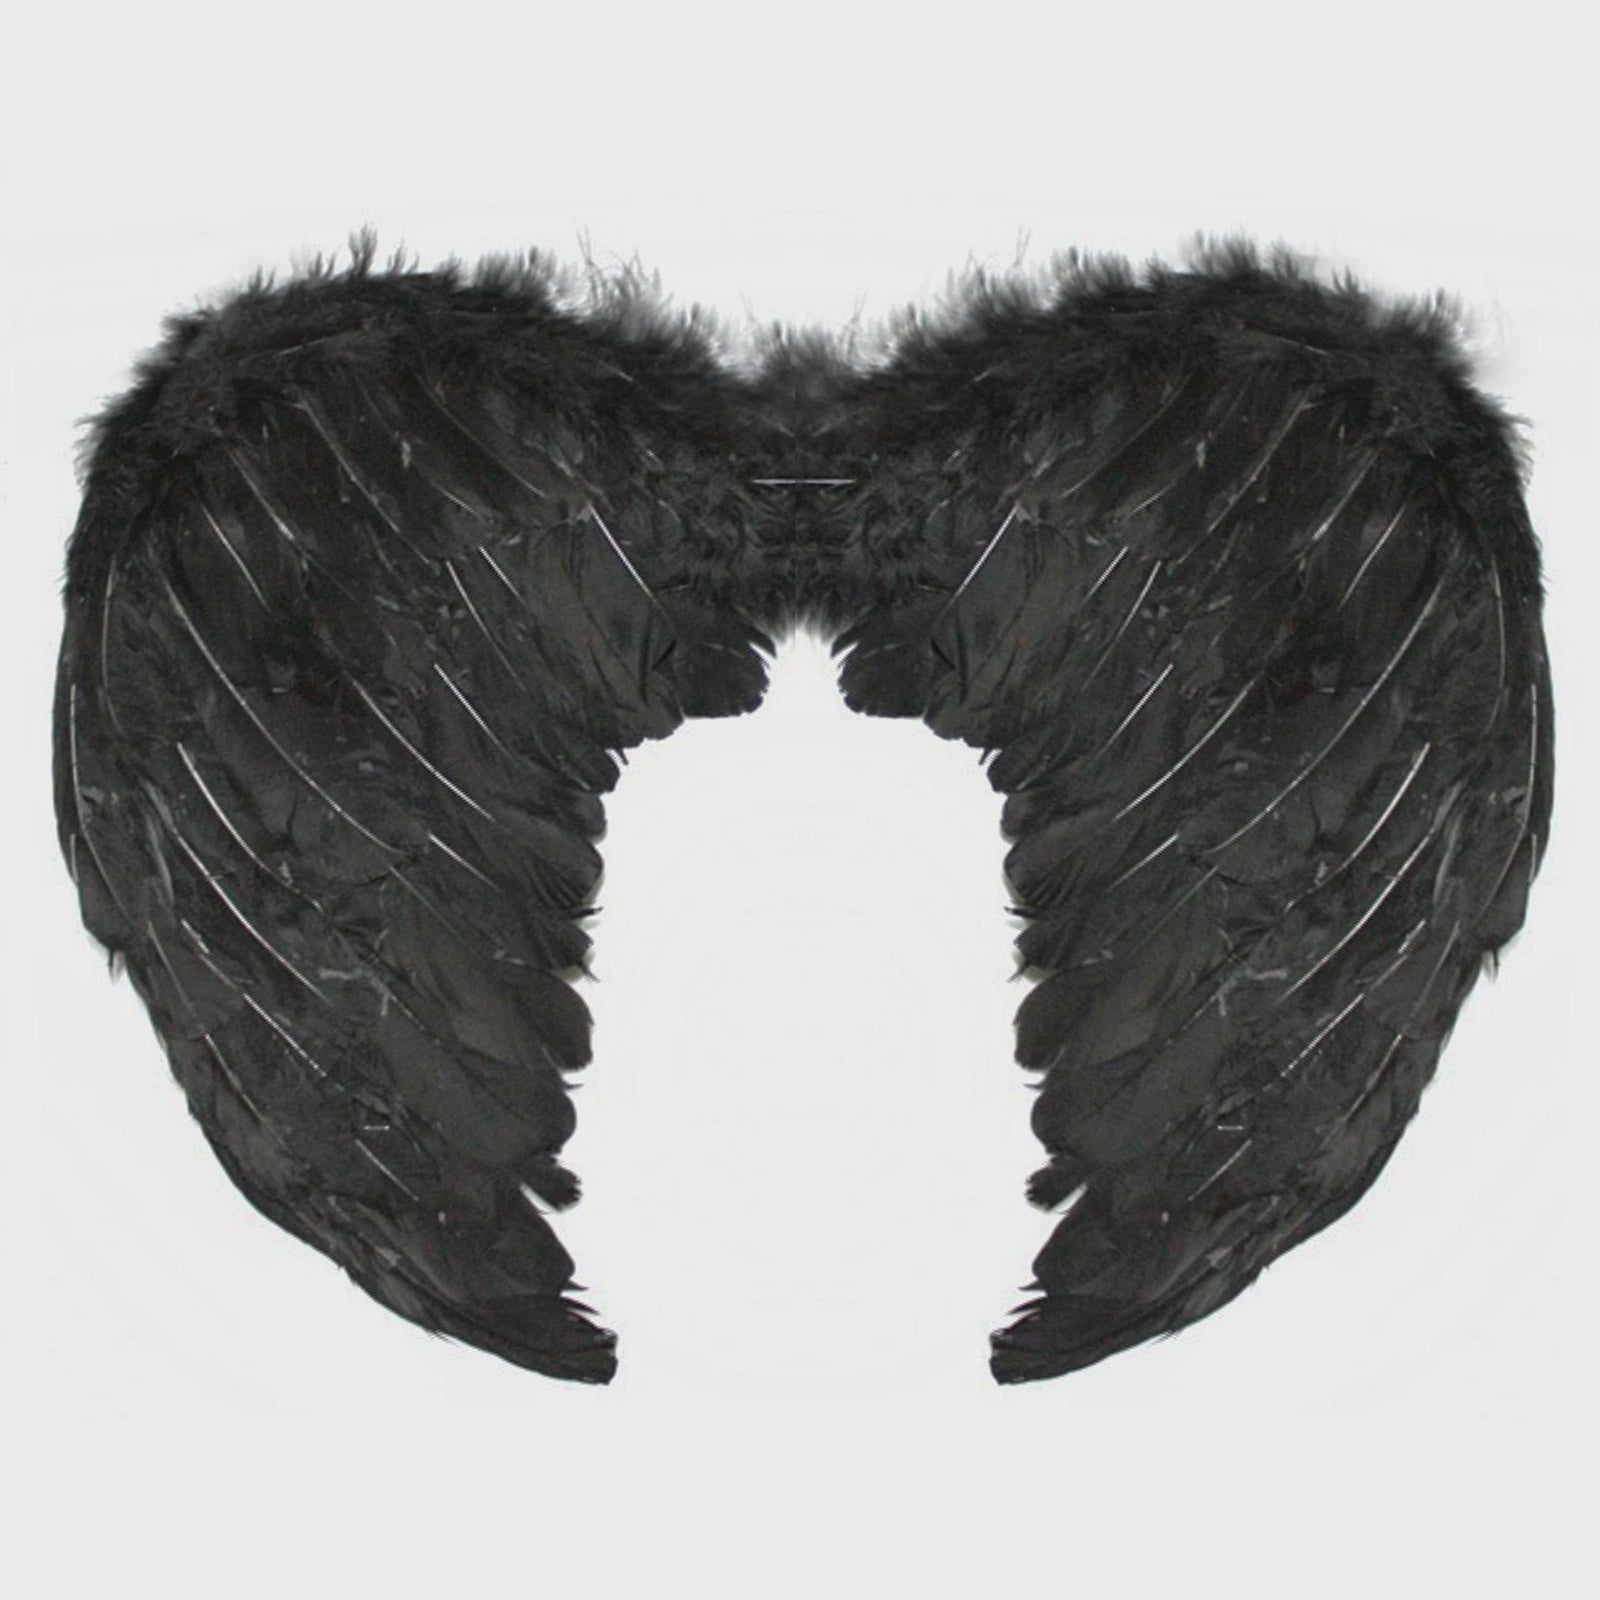 Black Feather Small Angel Wings